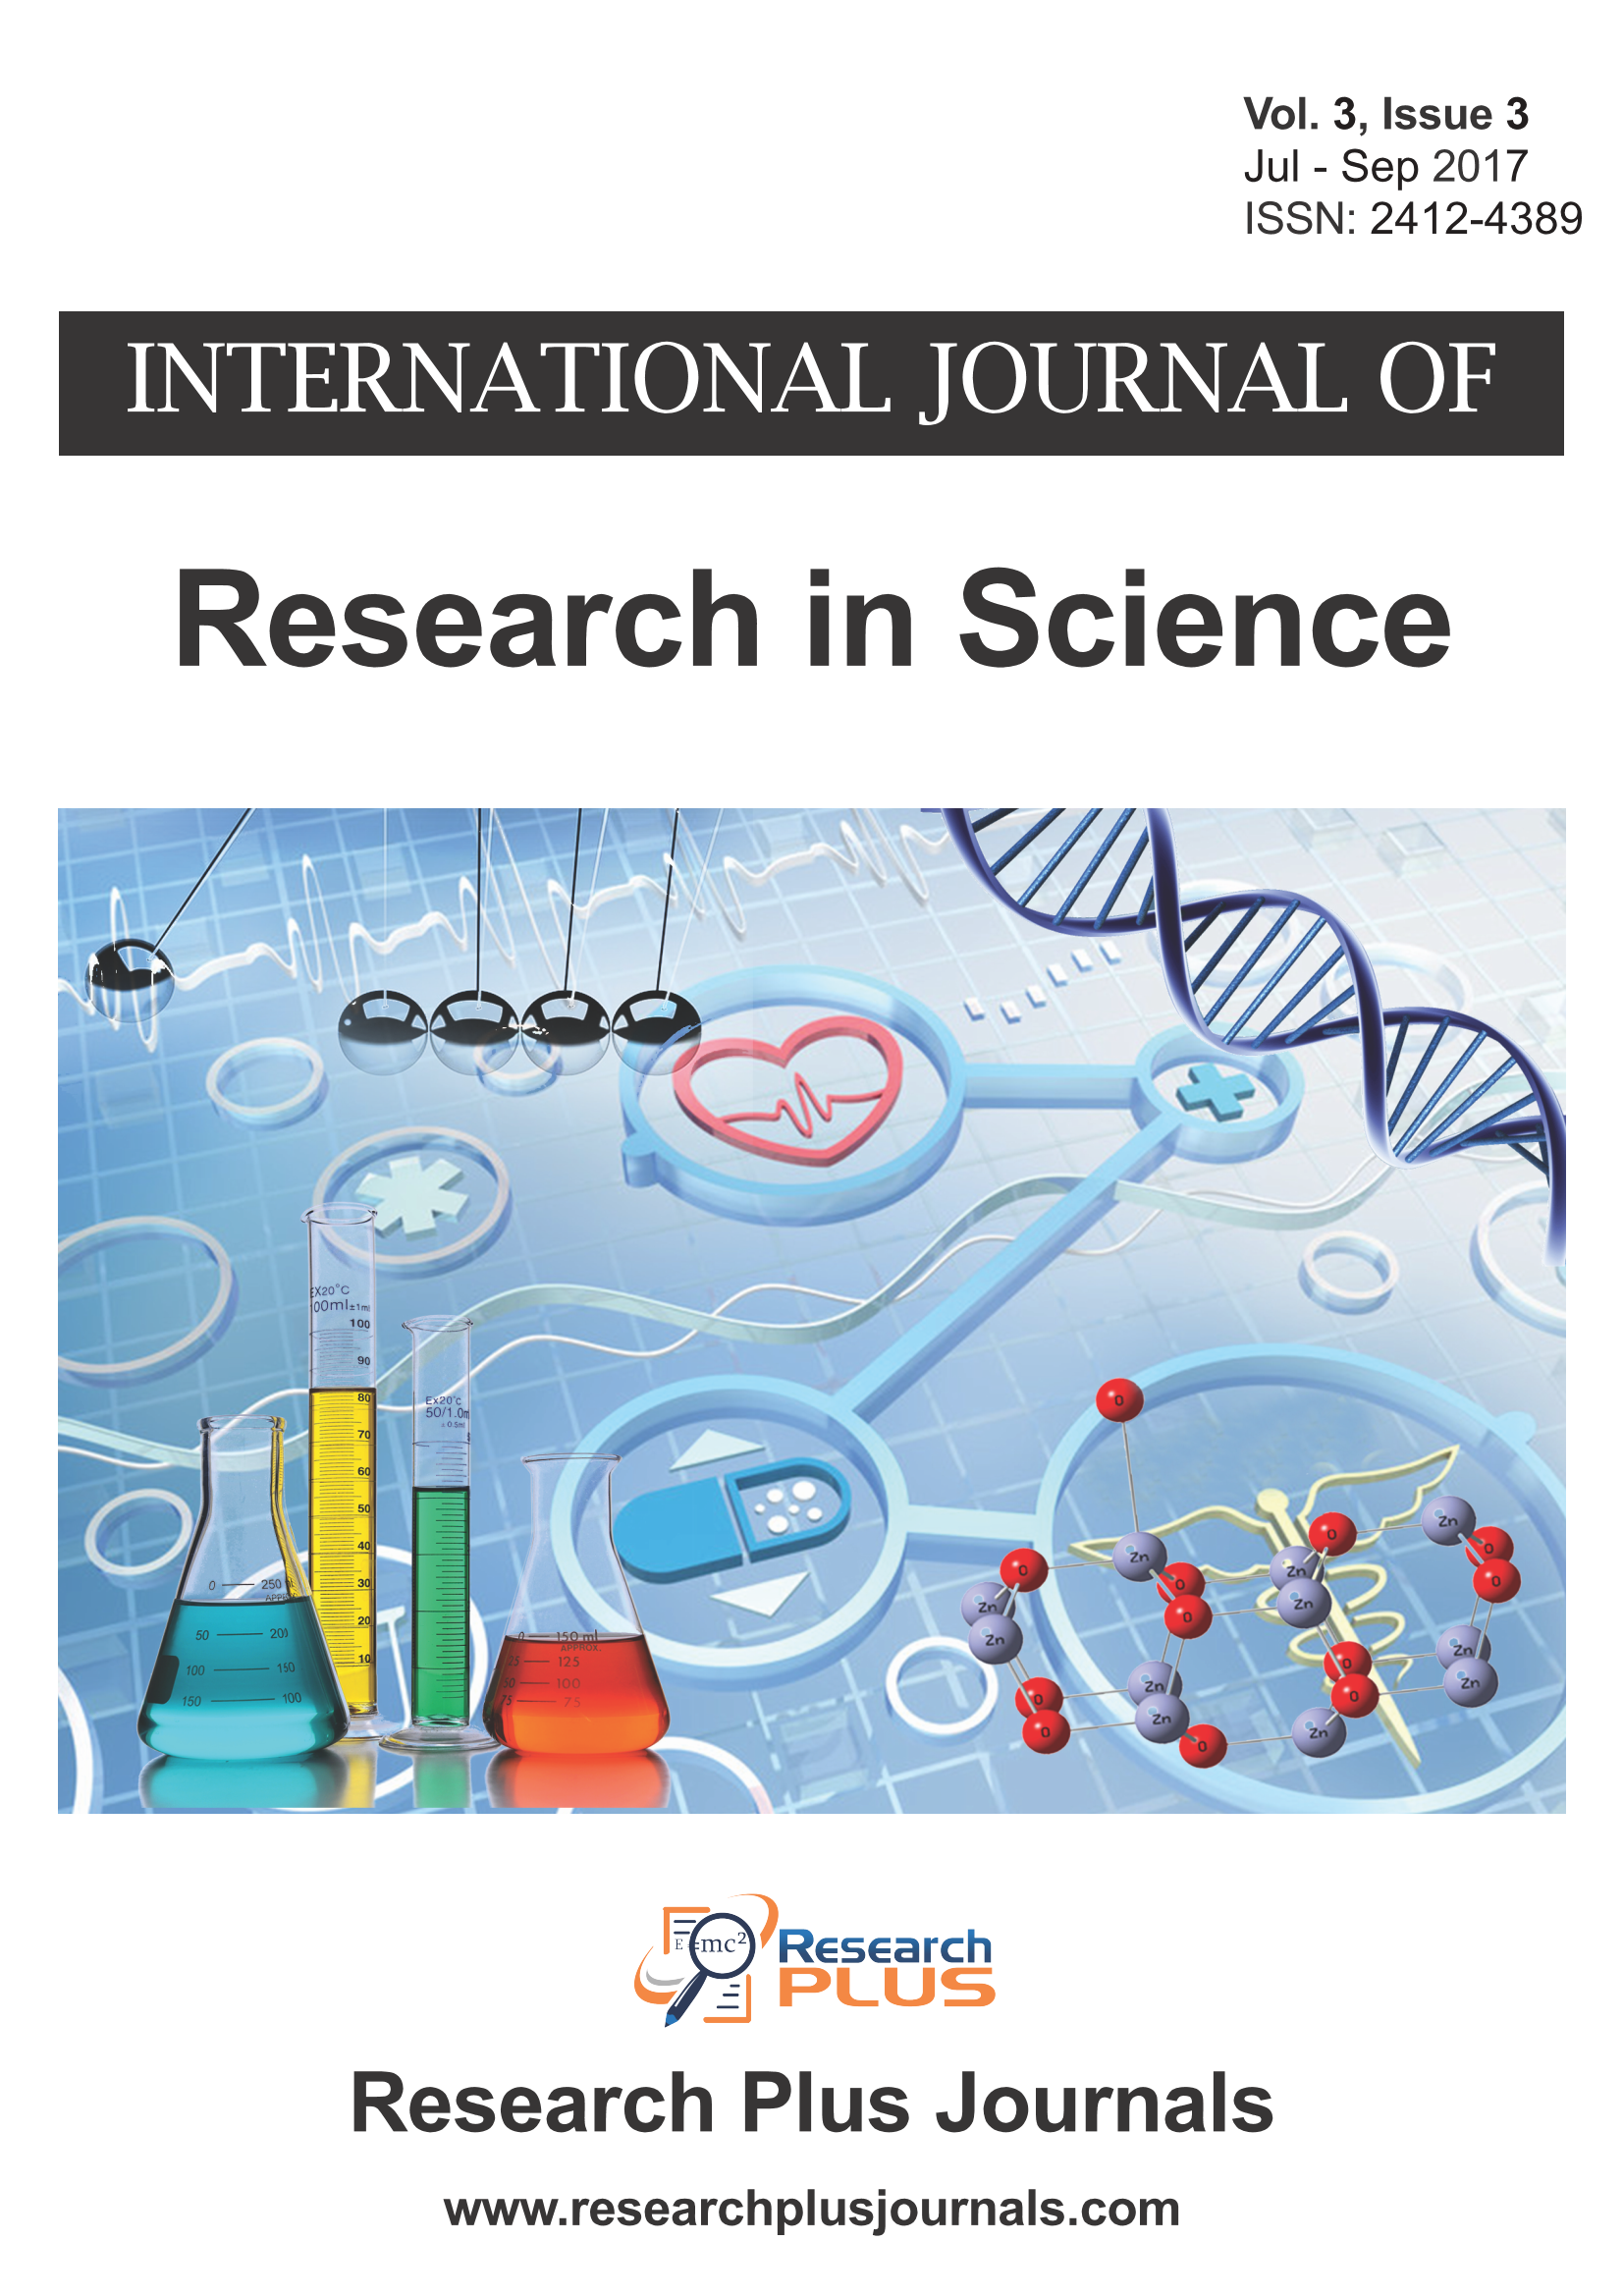 Volume 3, Issue 3, International Journal of Research in Science (IJRS) (Online ISSN 2412-4389)